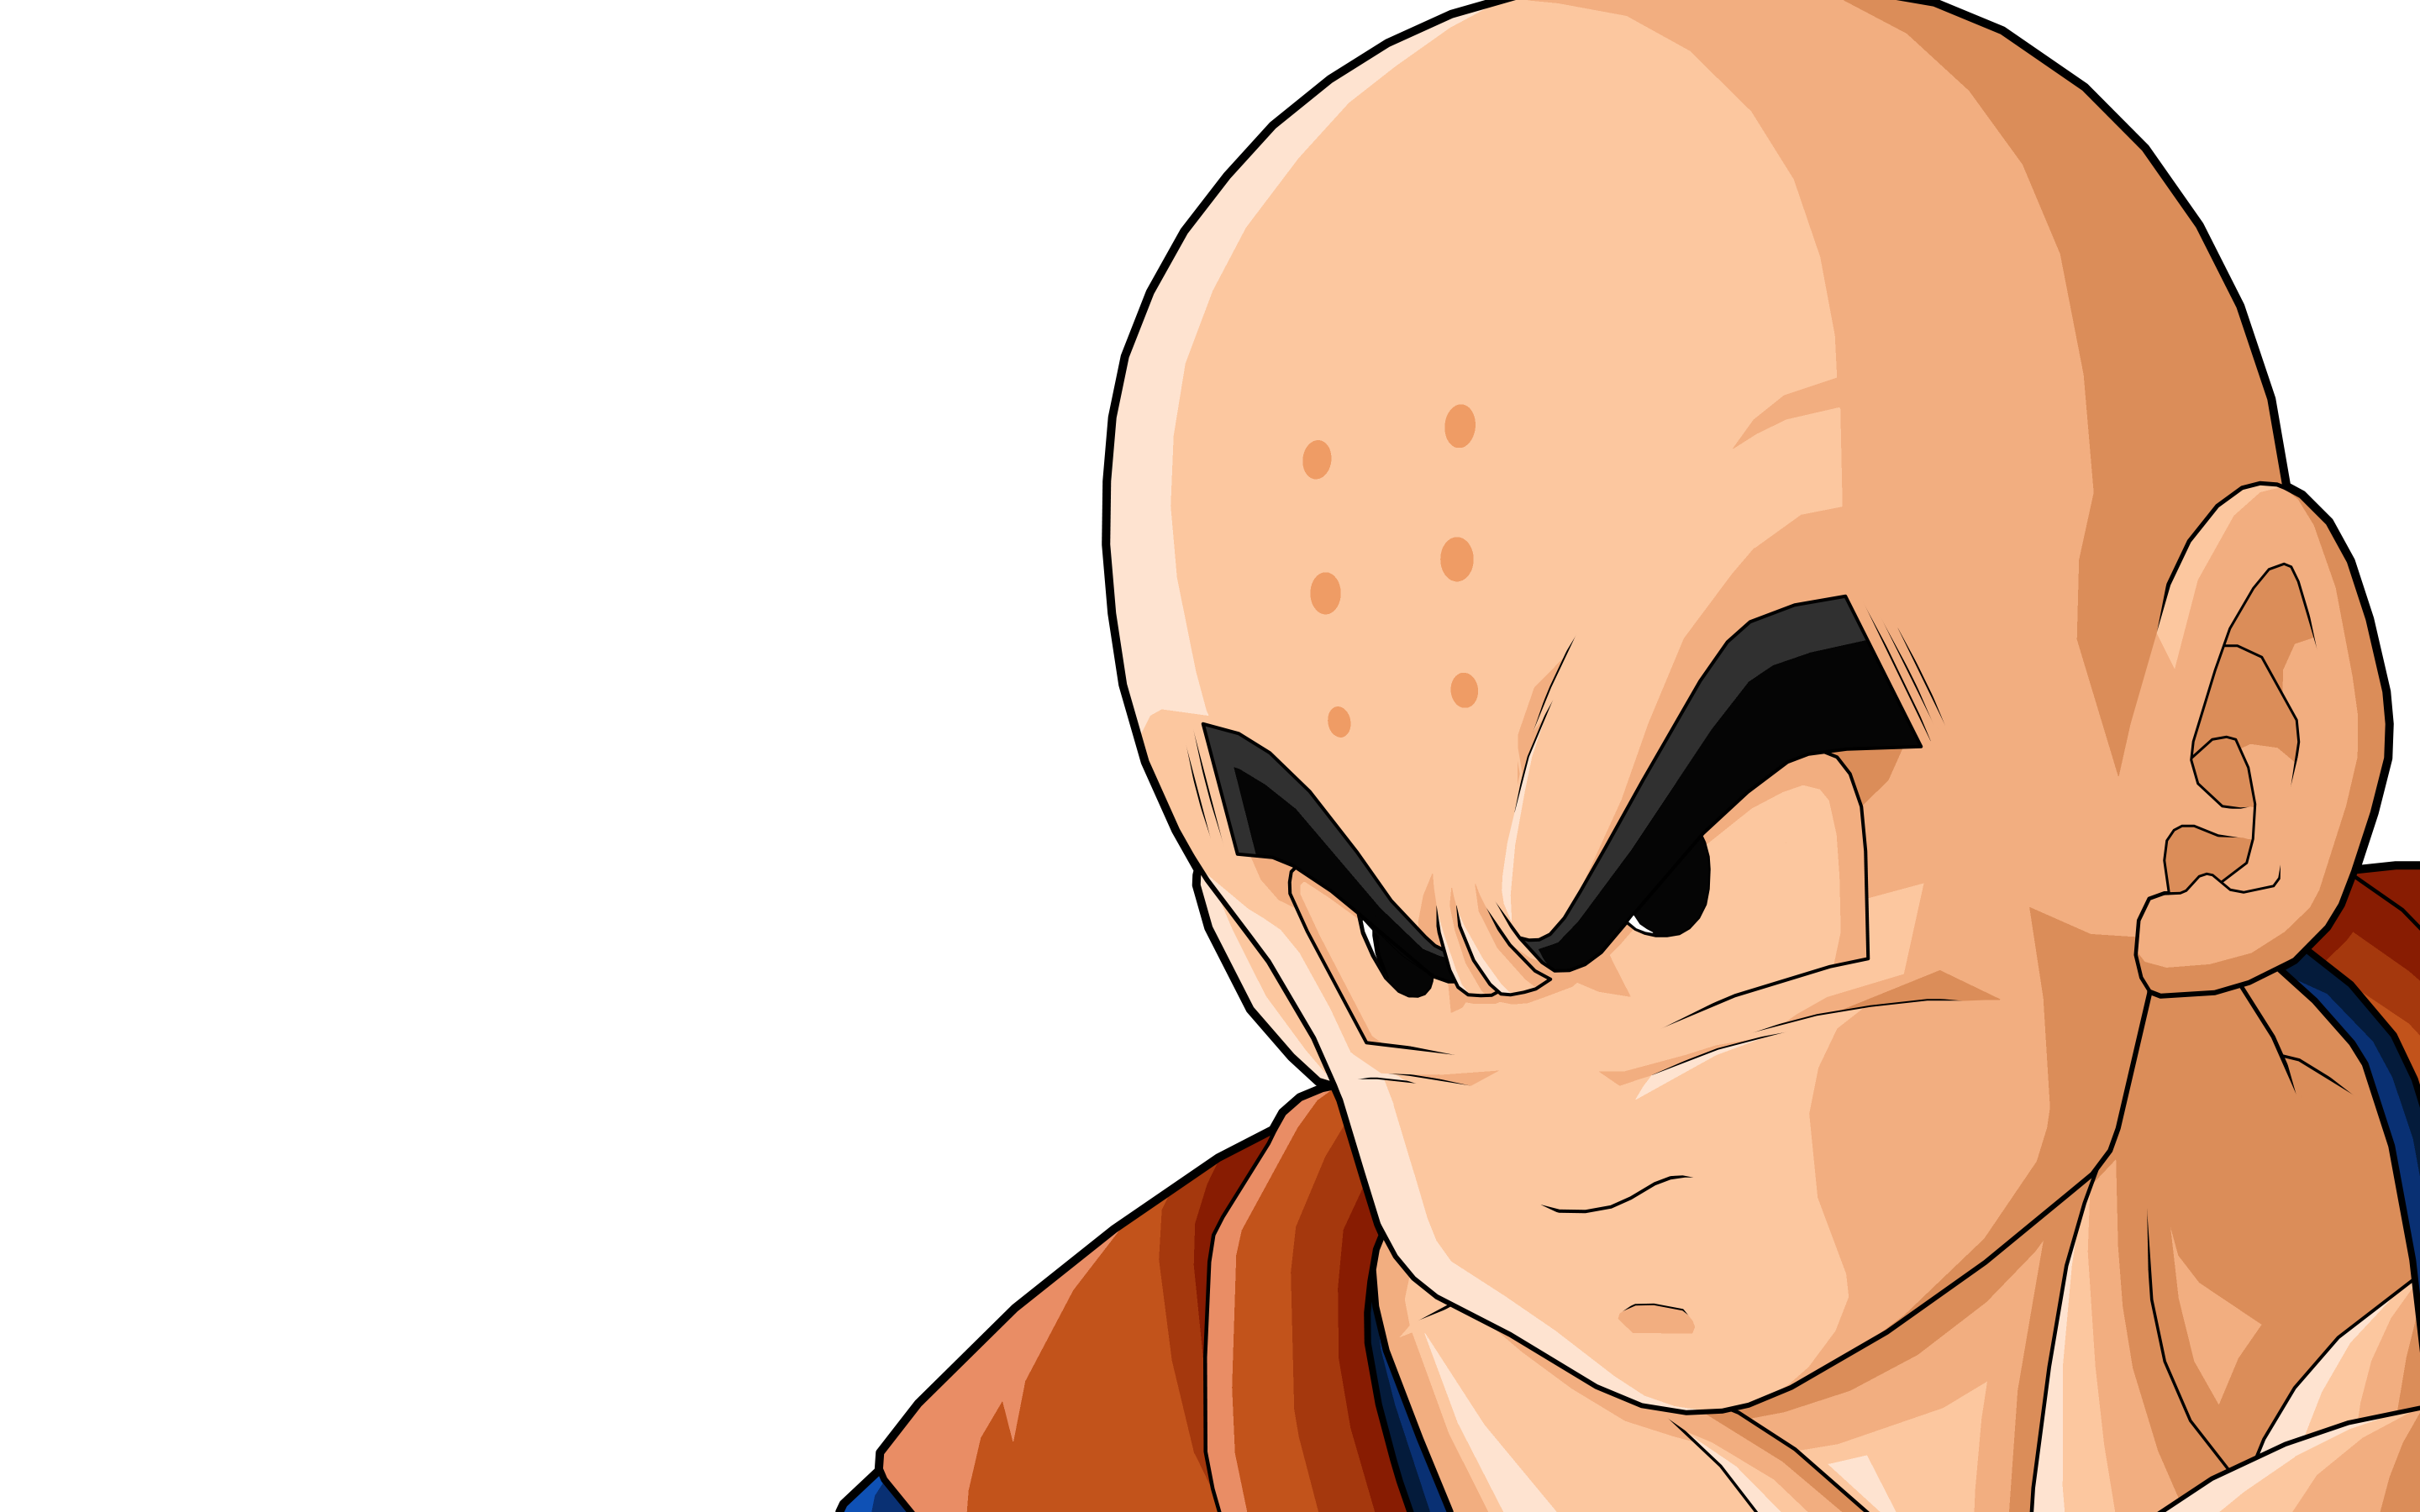 Krillin gives each of the warriors a senzu bean, and piccolo states he has ...